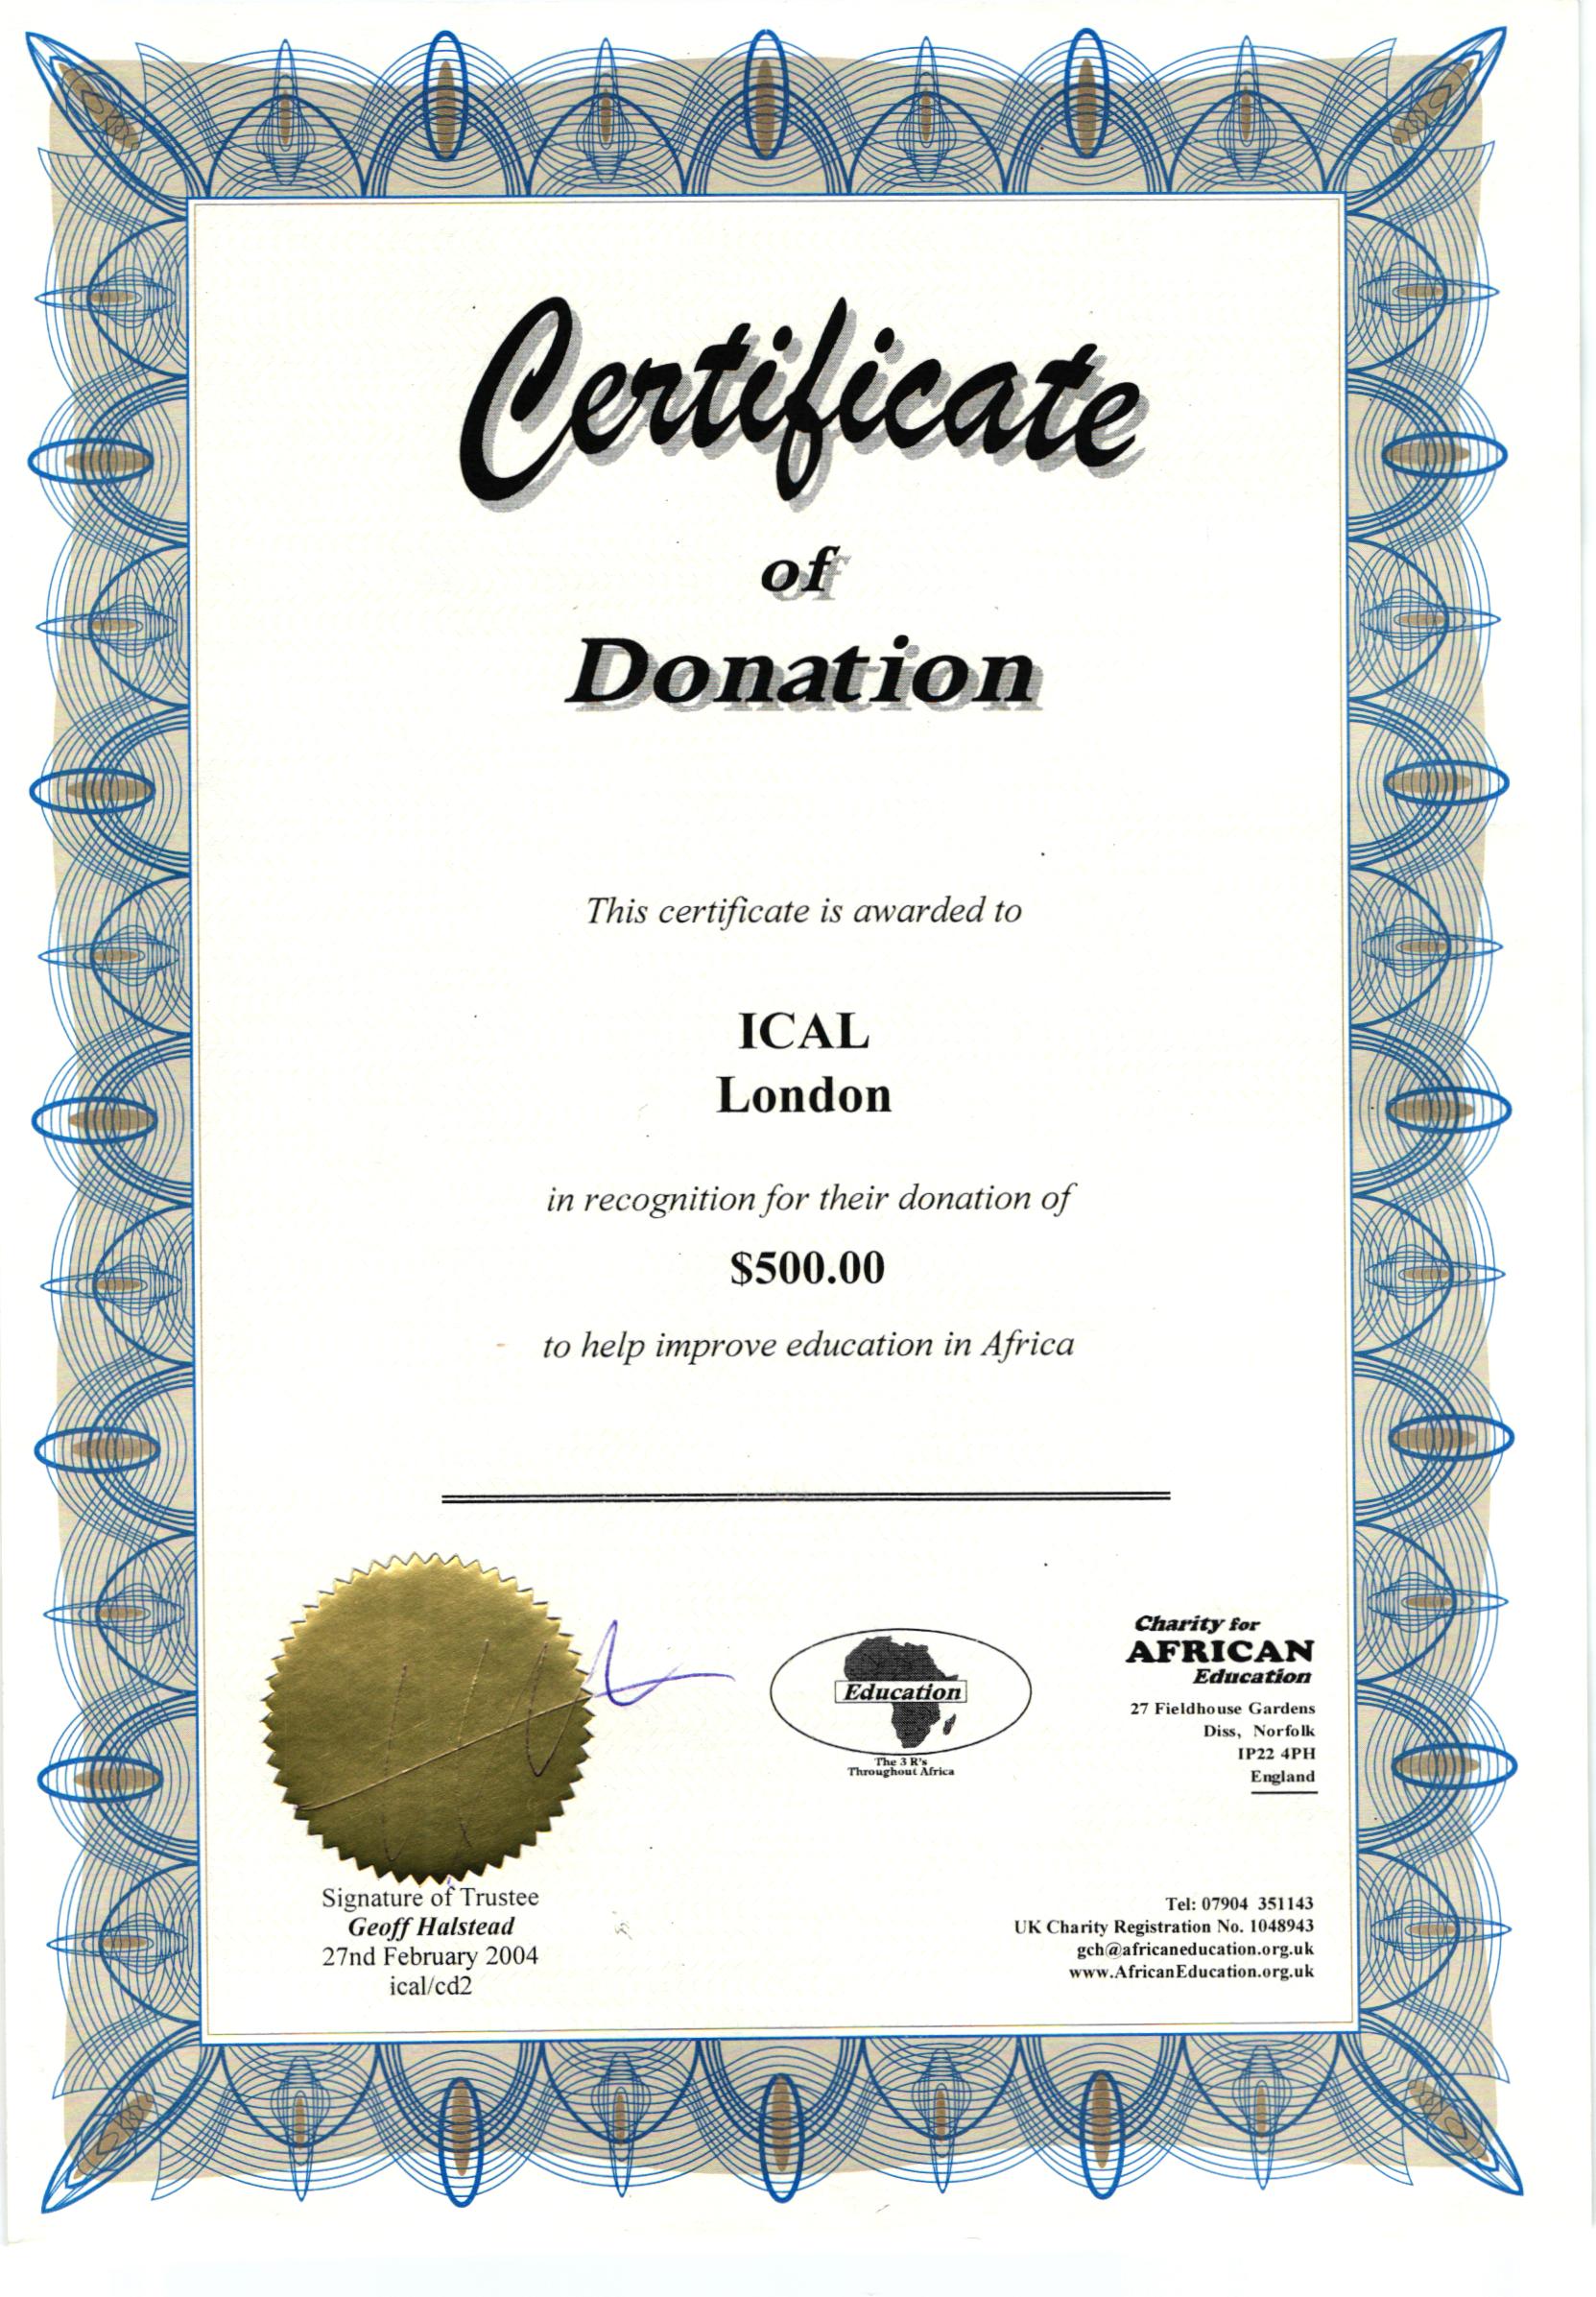 Certificate of Donation